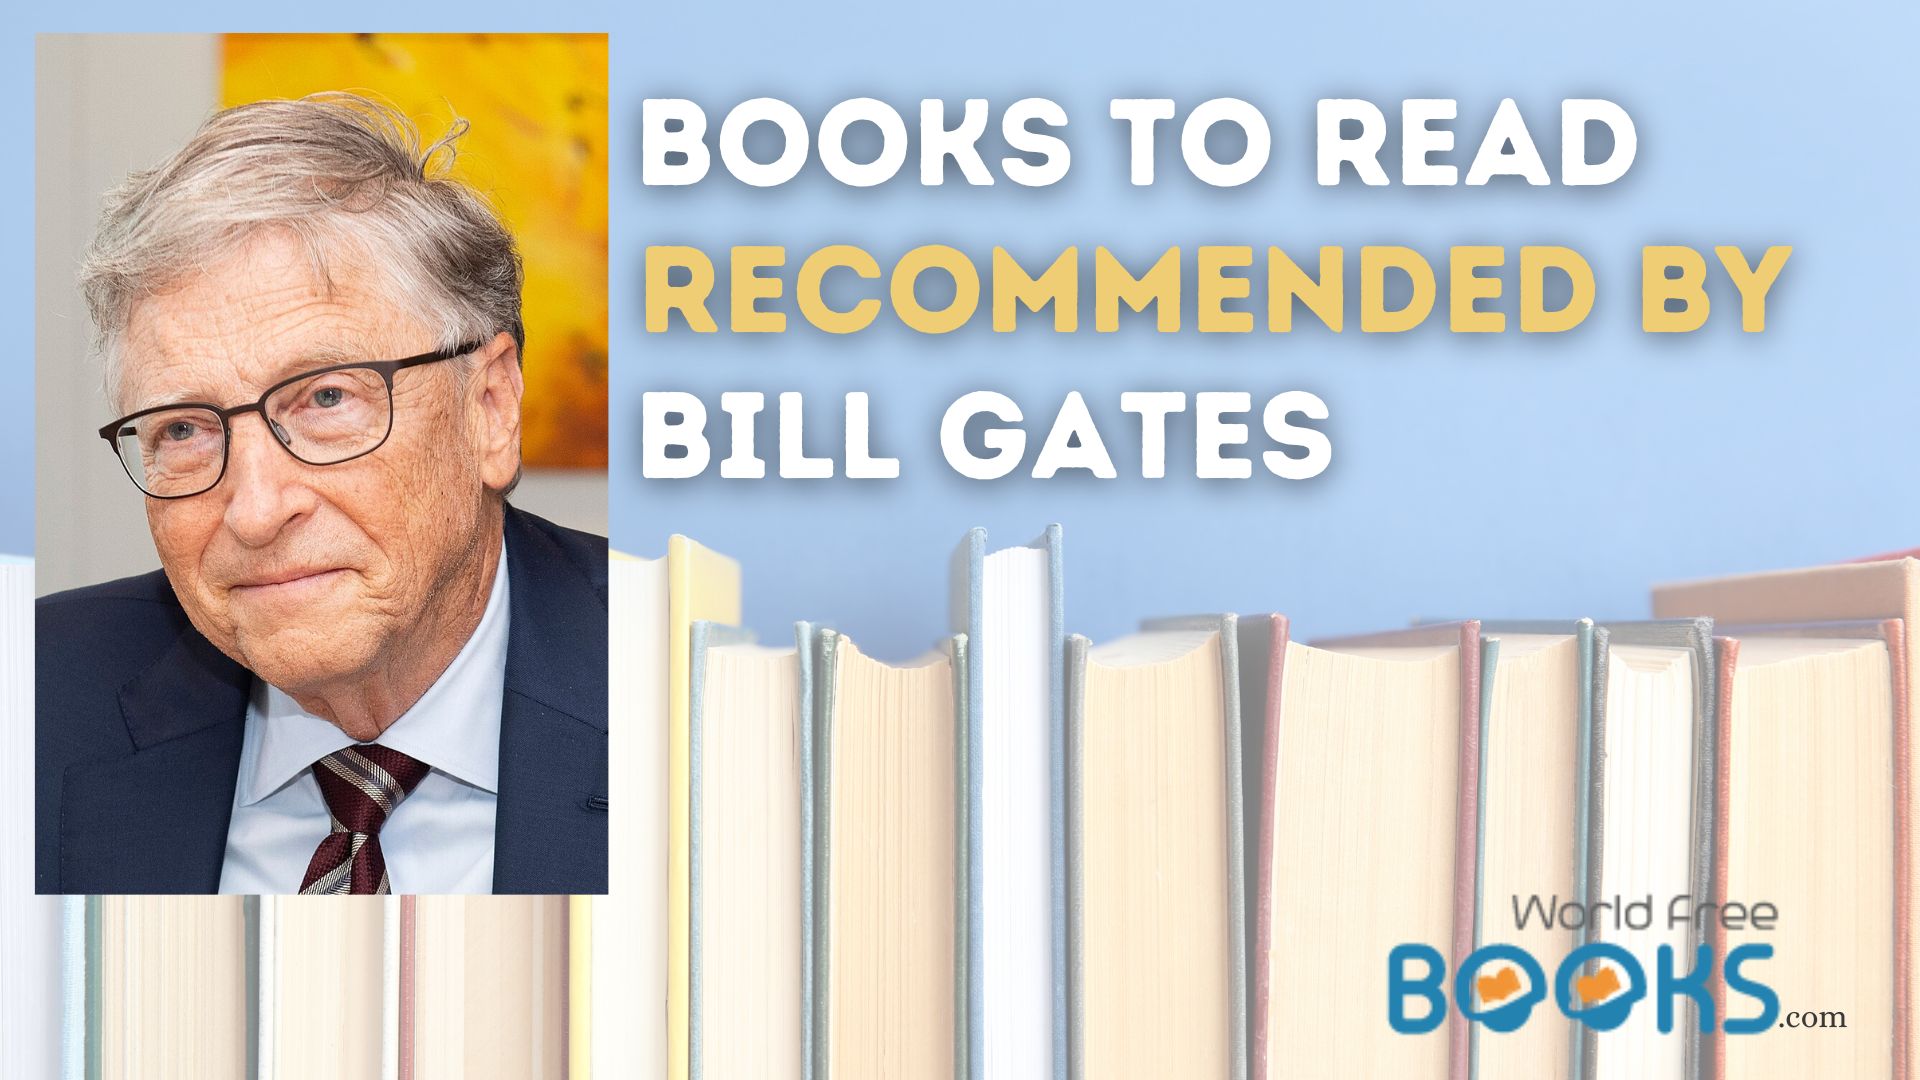 Books To Read Recommended By Bill Gates